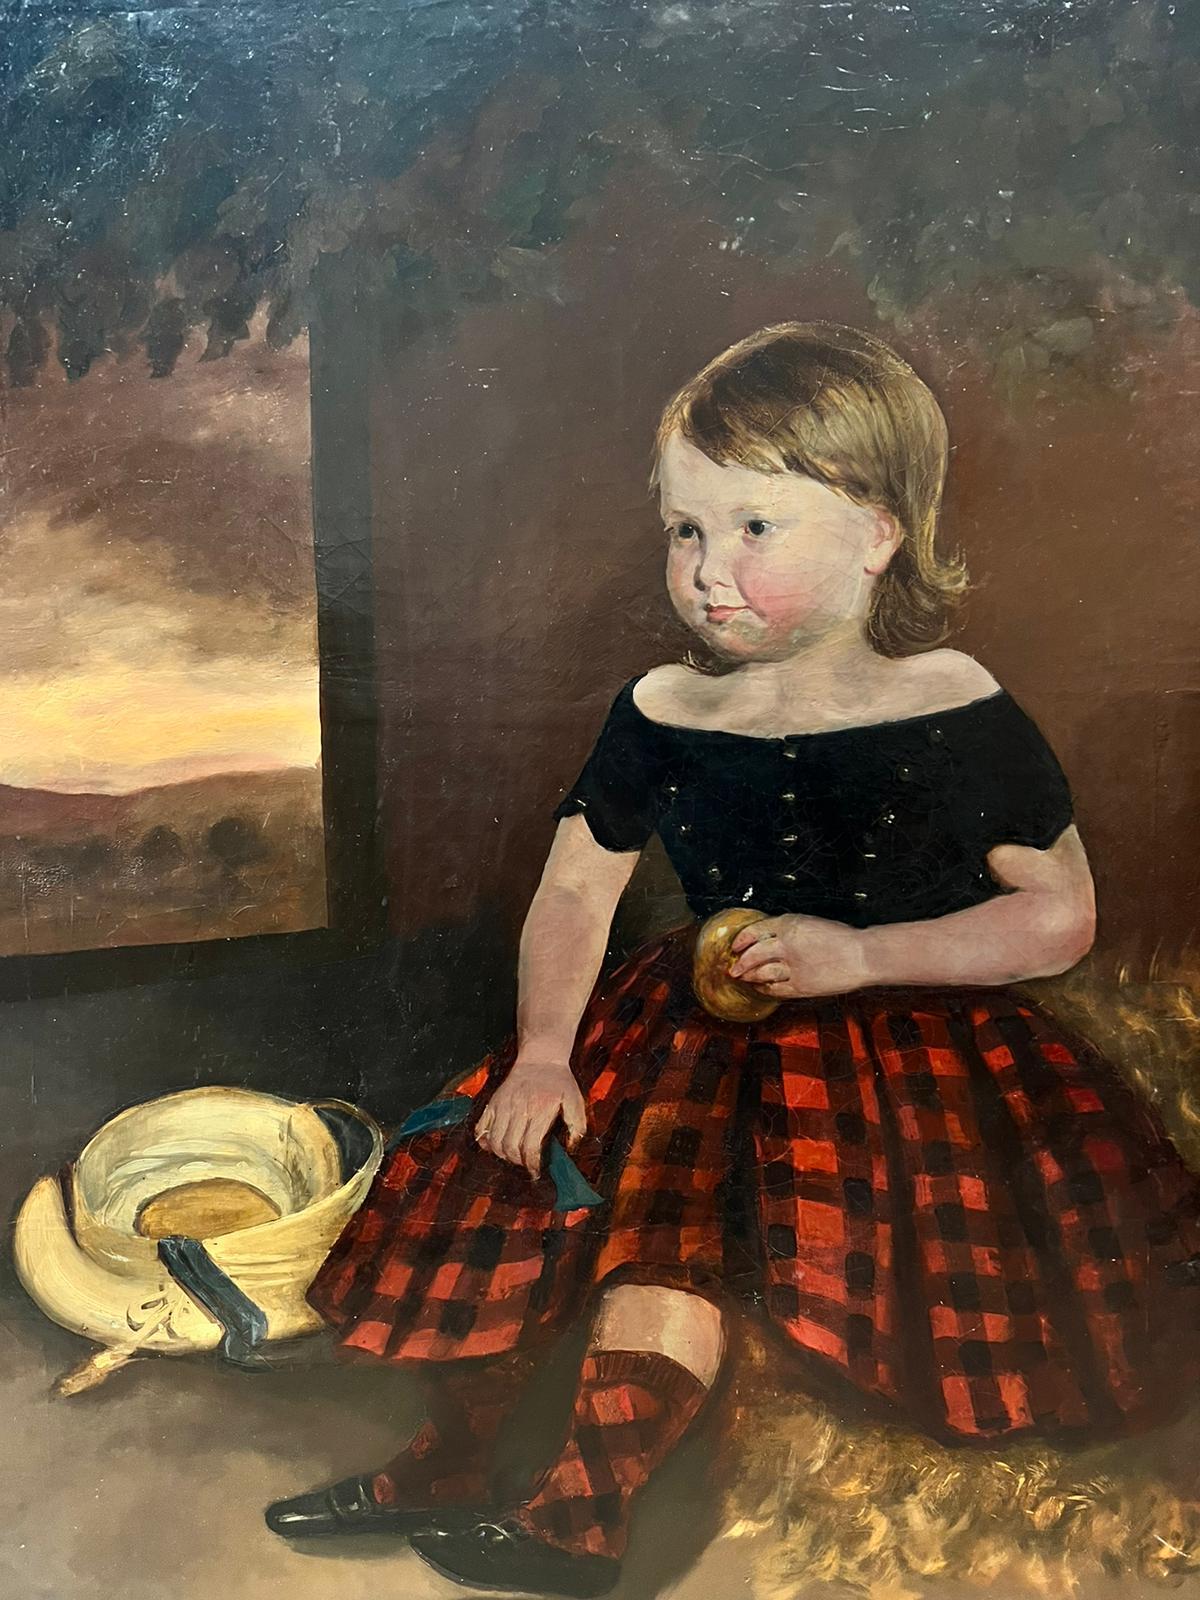 The Crofters Daughter
Scottish School, 19th century
oil painting on canvas, unframed
canvas: 36 x 28 inches
provenance: private collection, UK
condition: very good and sound condition 
